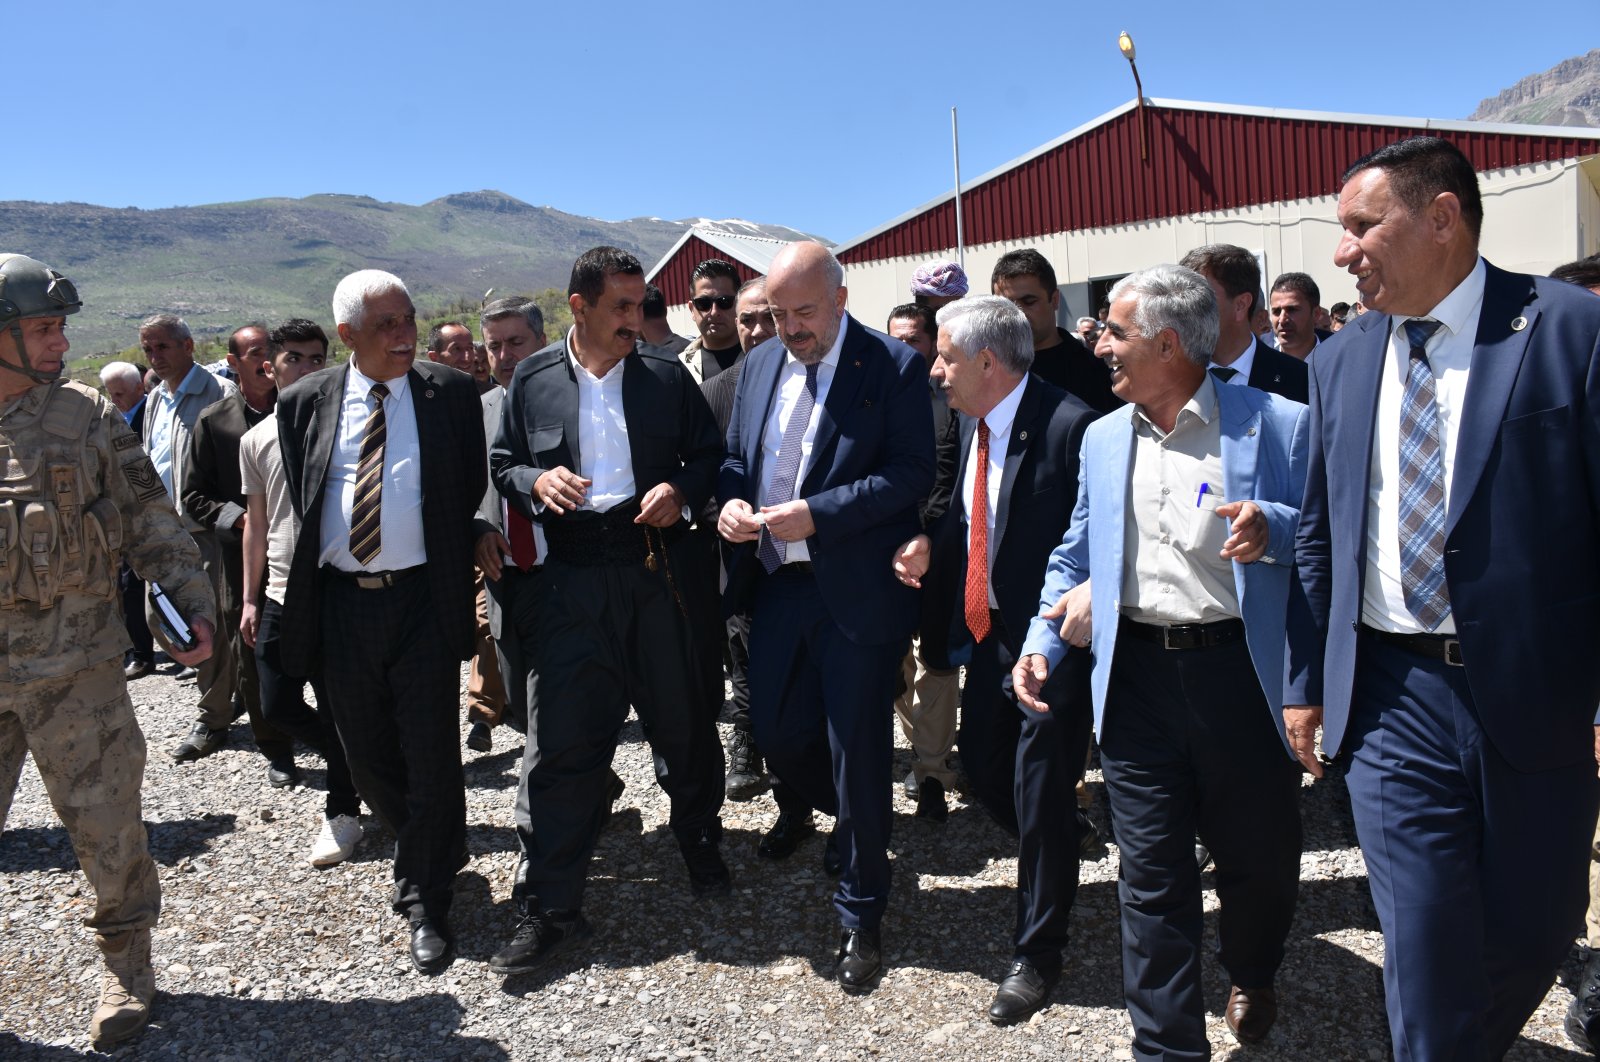 Deputy Commerce Minister Rıza Tuna Turagay (center) is seen at the site of the new border gate in Hakkari, May 8, 2023. (AA Photo)